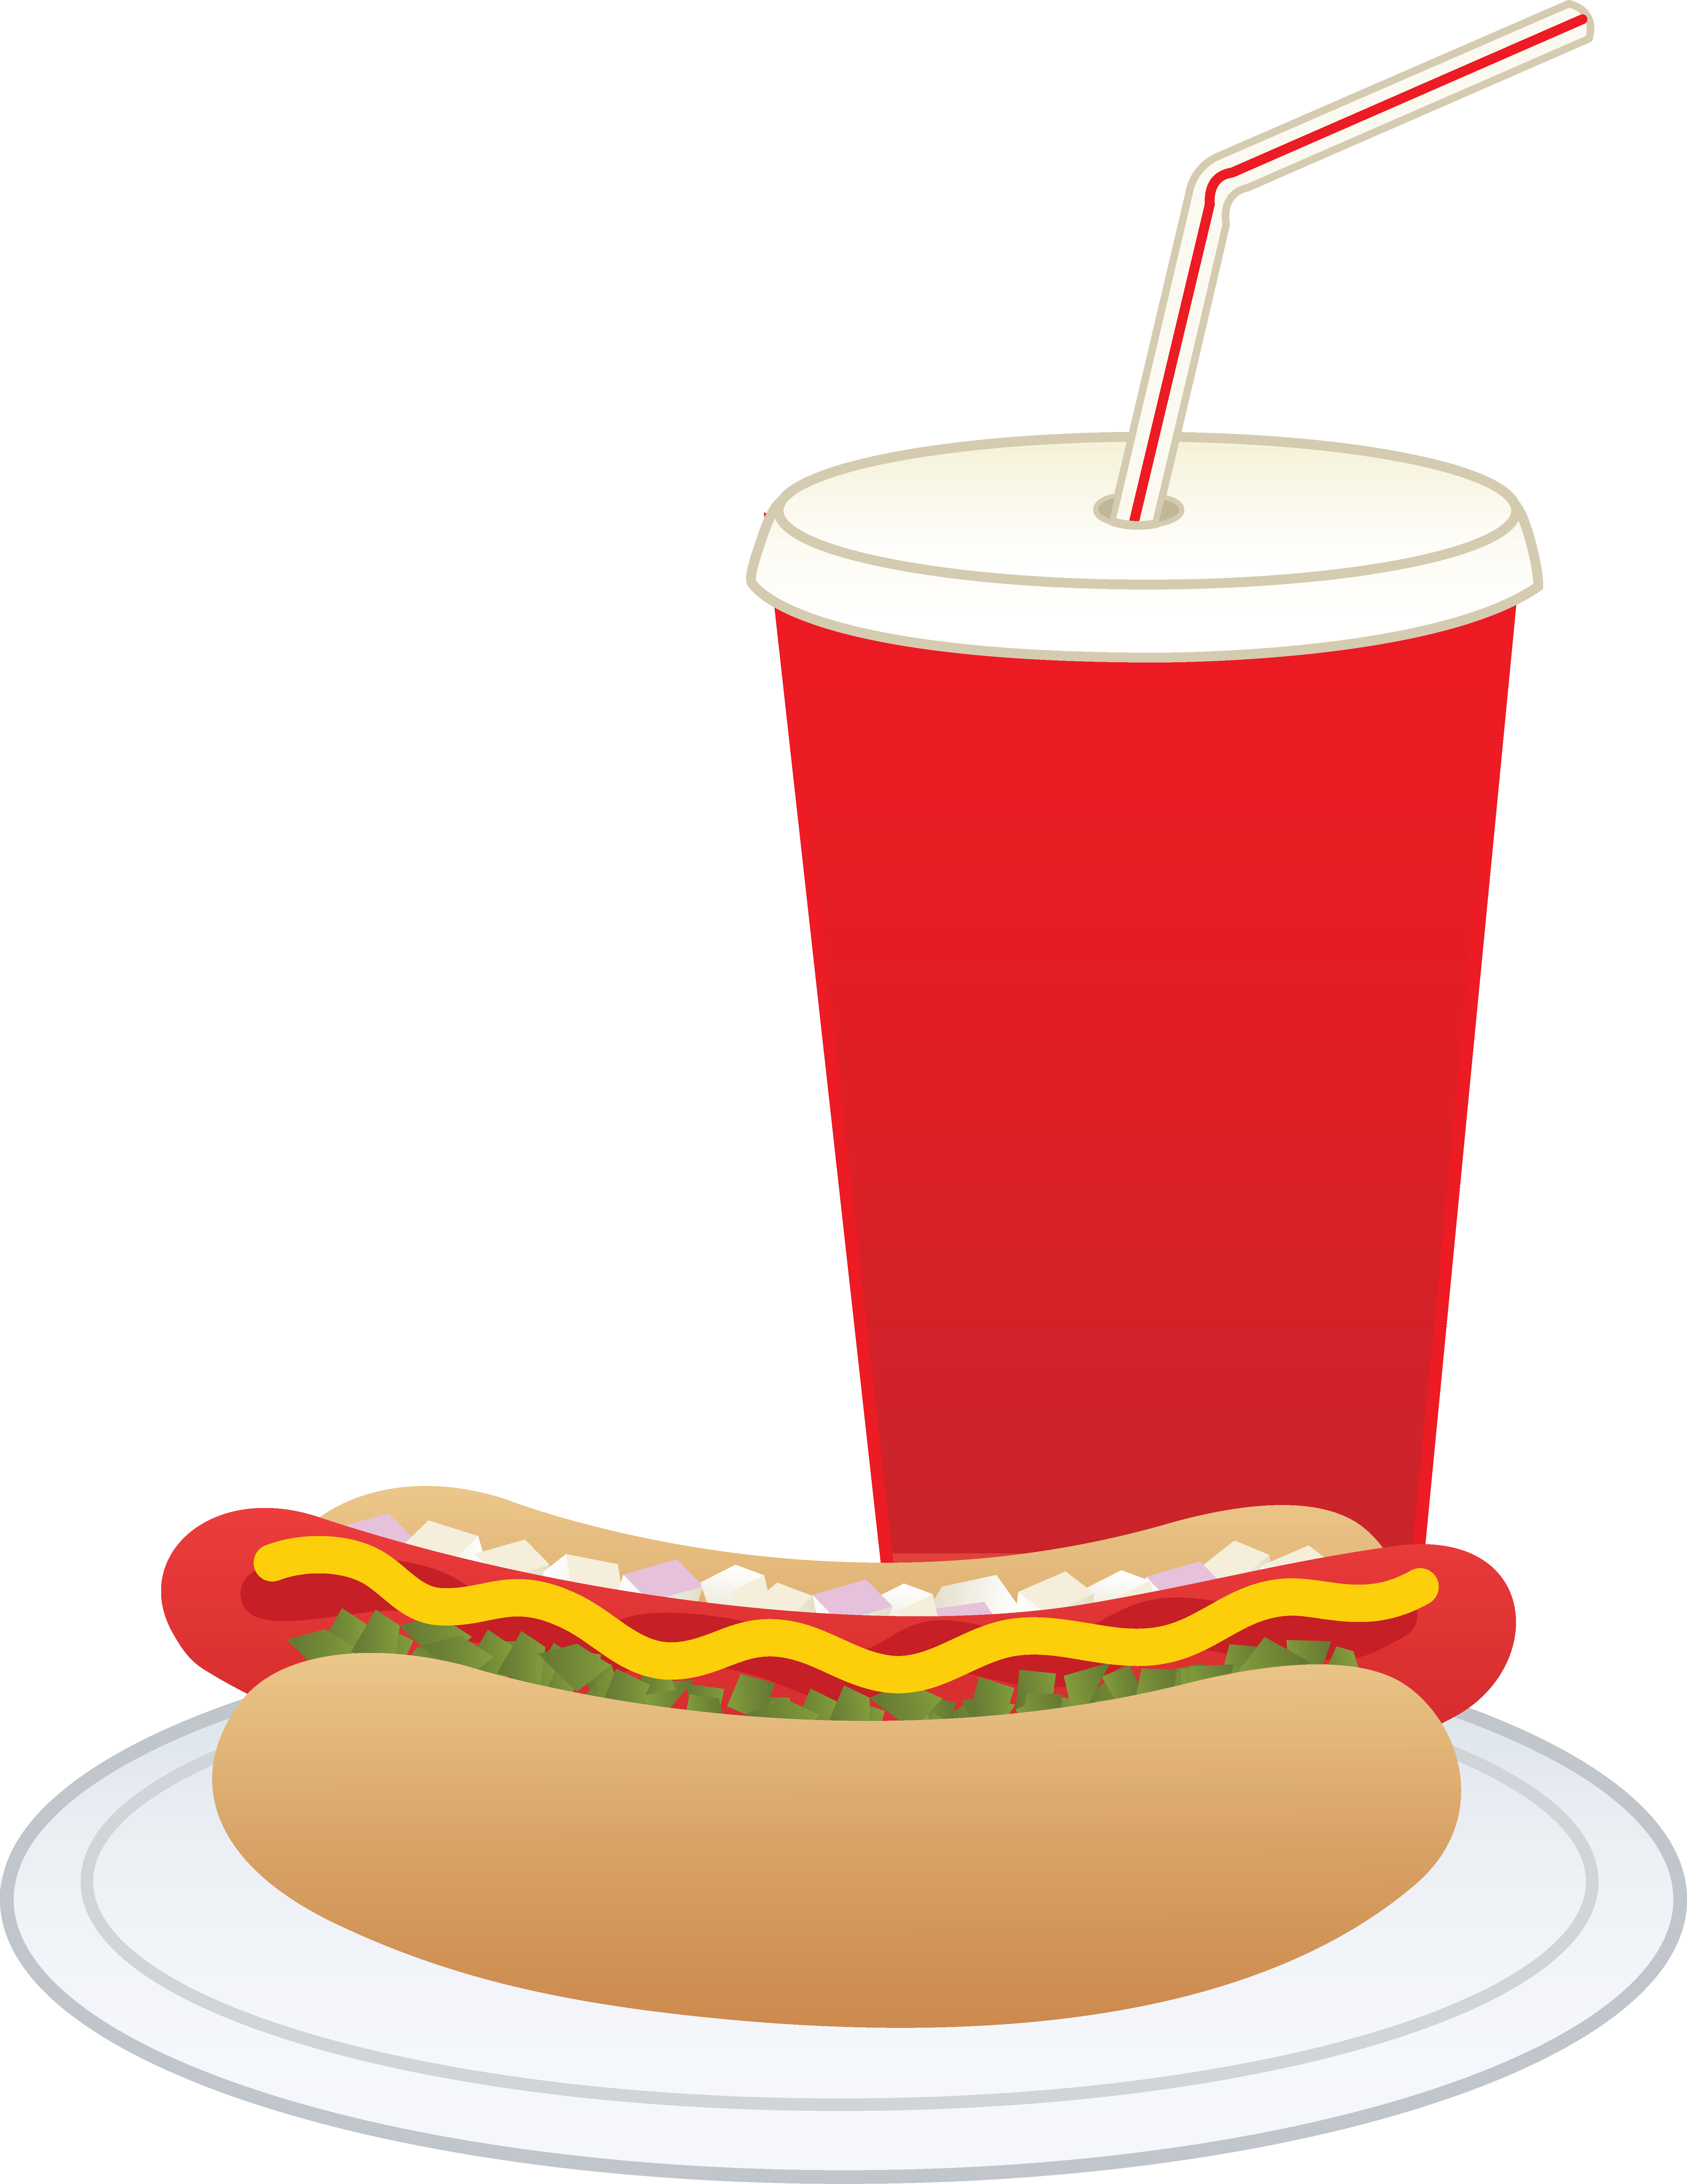 Hot dog chips and drink clipart